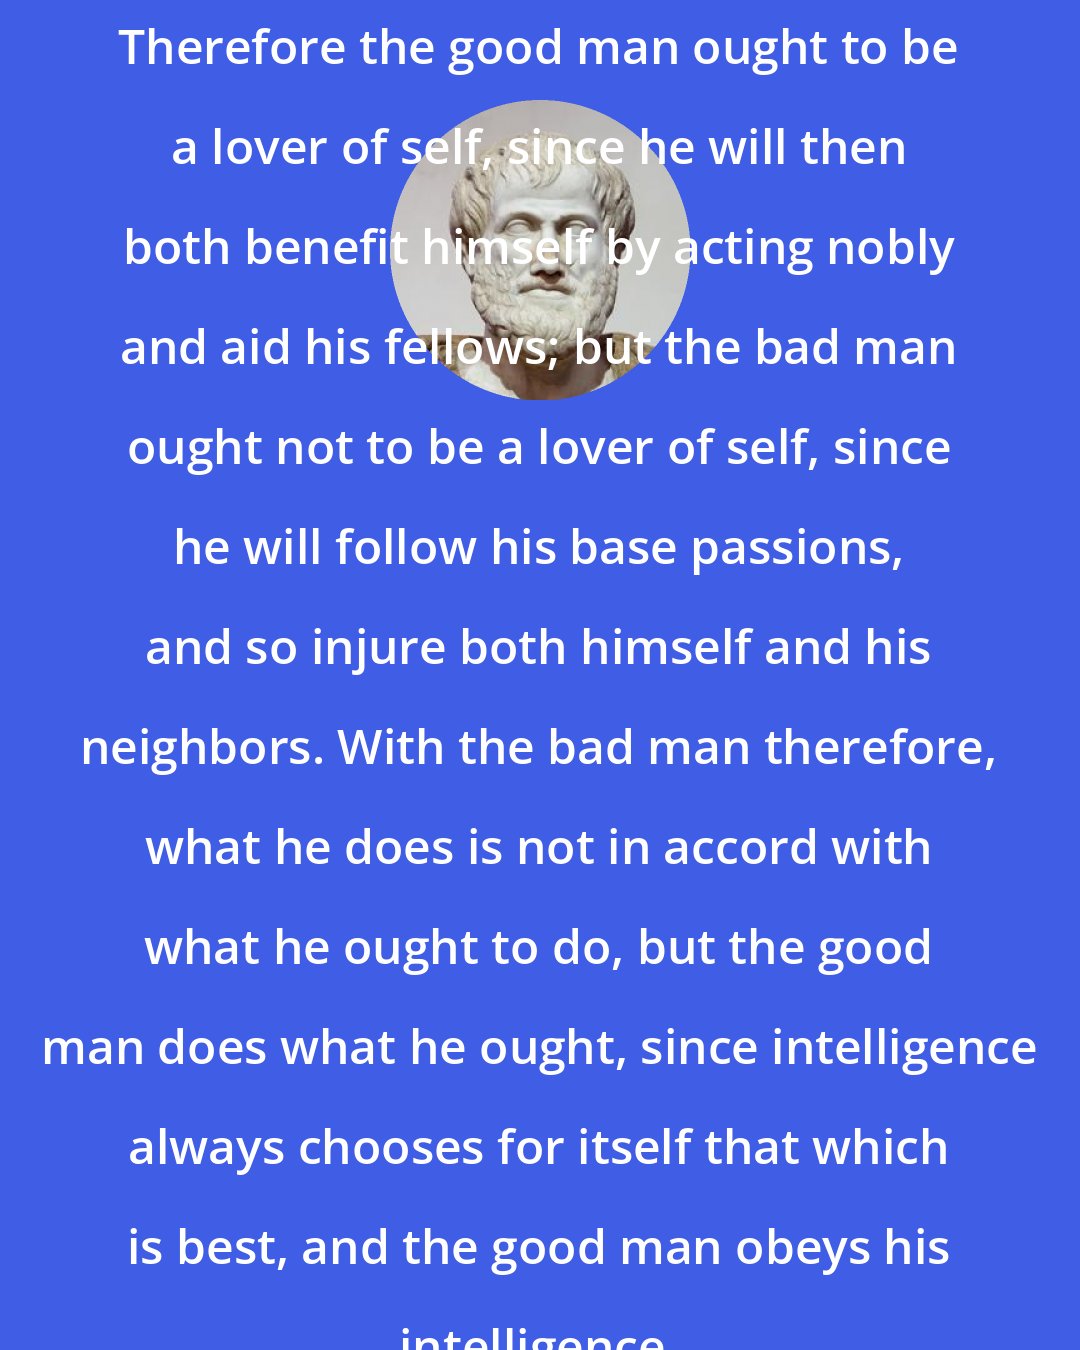 Aristotle: Therefore the good man ought to be a lover of self, since he will then both benefit himself by acting nobly and aid his fellows; but the bad man ought not to be a lover of self, since he will follow his base passions, and so injure both himself and his neighbors. With the bad man therefore, what he does is not in accord with what he ought to do, but the good man does what he ought, since intelligence always chooses for itself that which is best, and the good man obeys his intelligence.